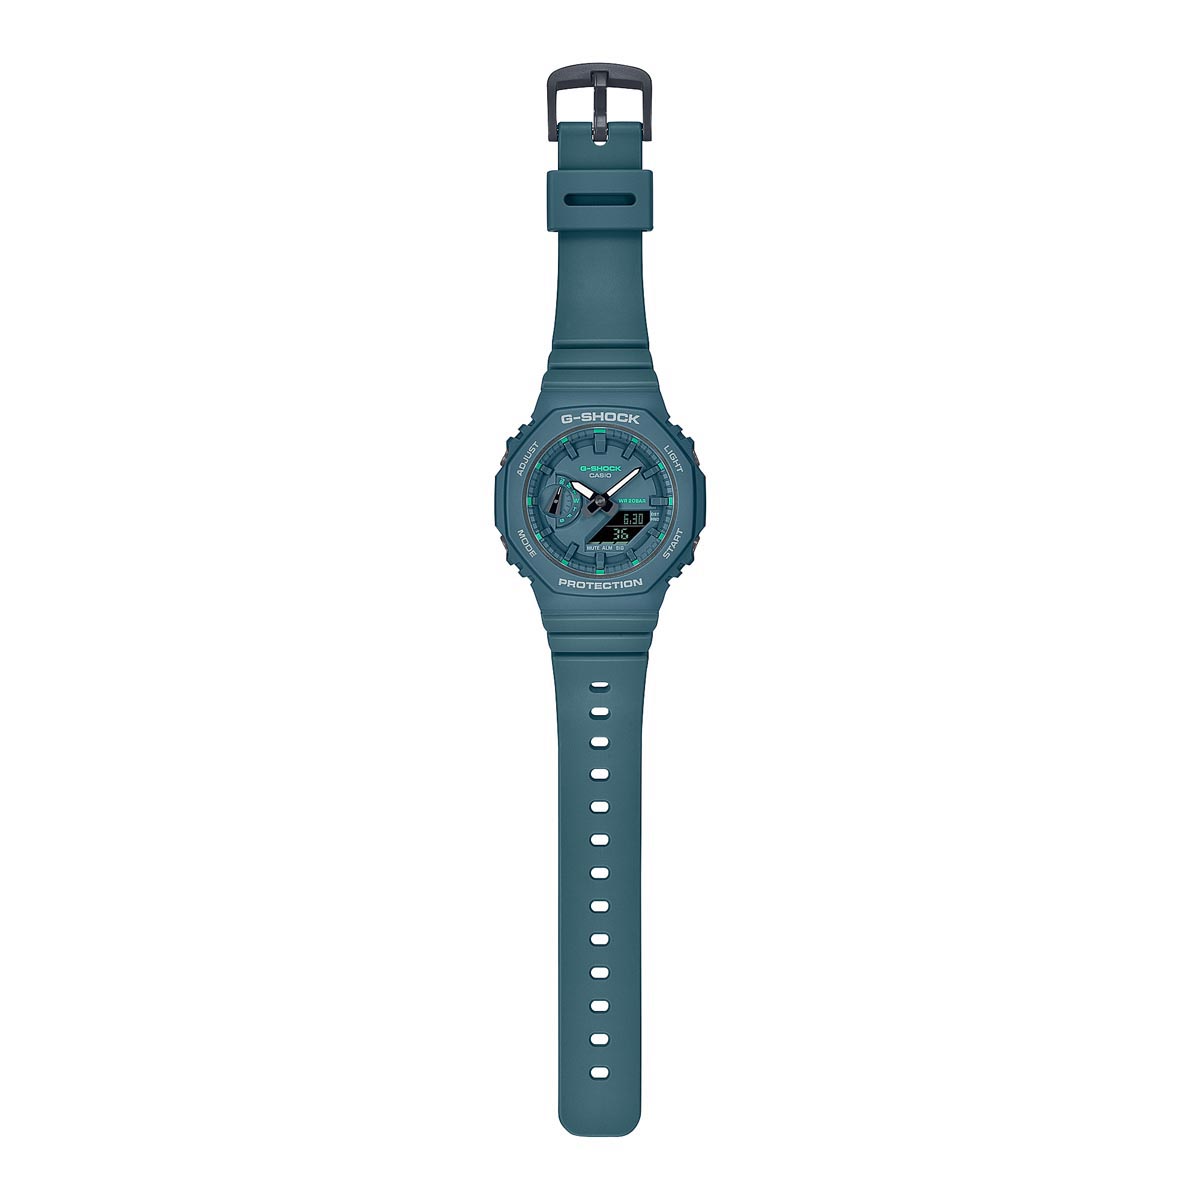 G Shock Womens Watch with Teal Dial and Teal Resin Bracelet (quartz movement)